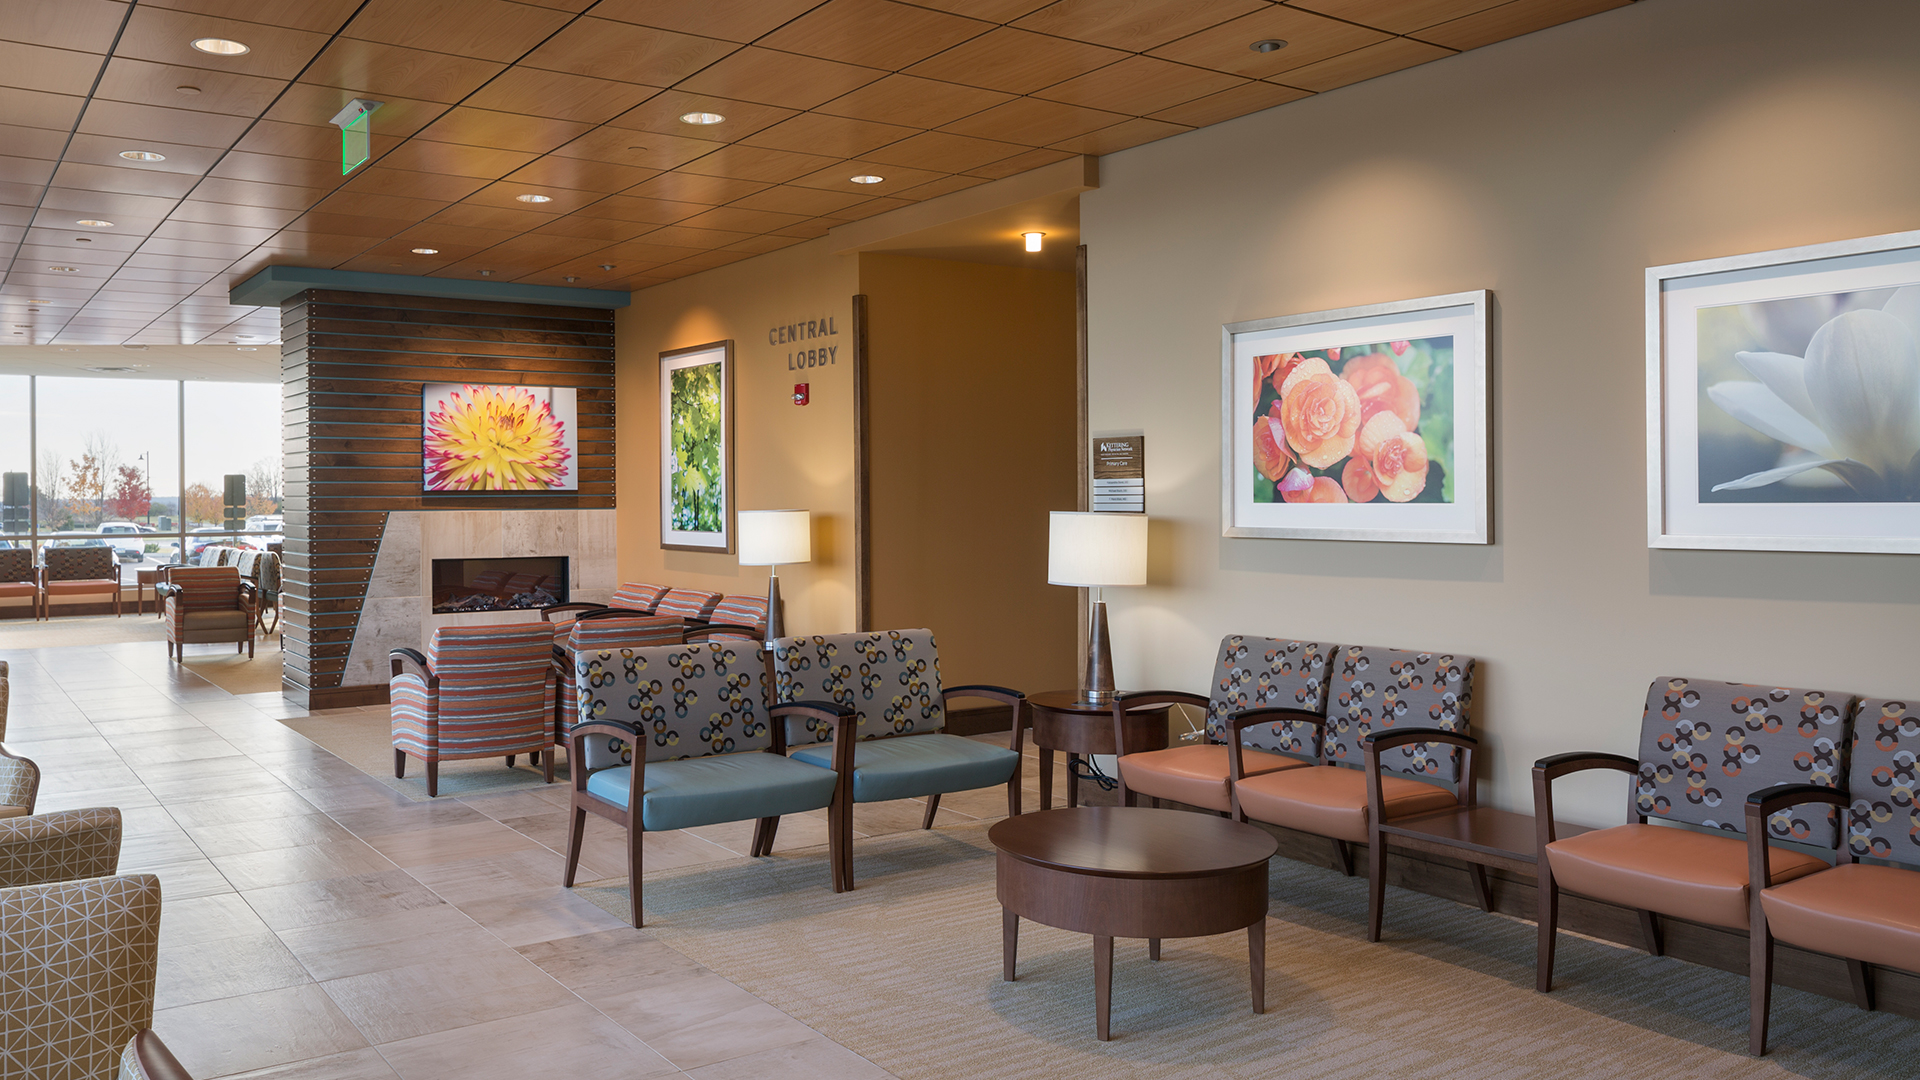 Lobby Waiting Room and Fire Place in Health Clinic